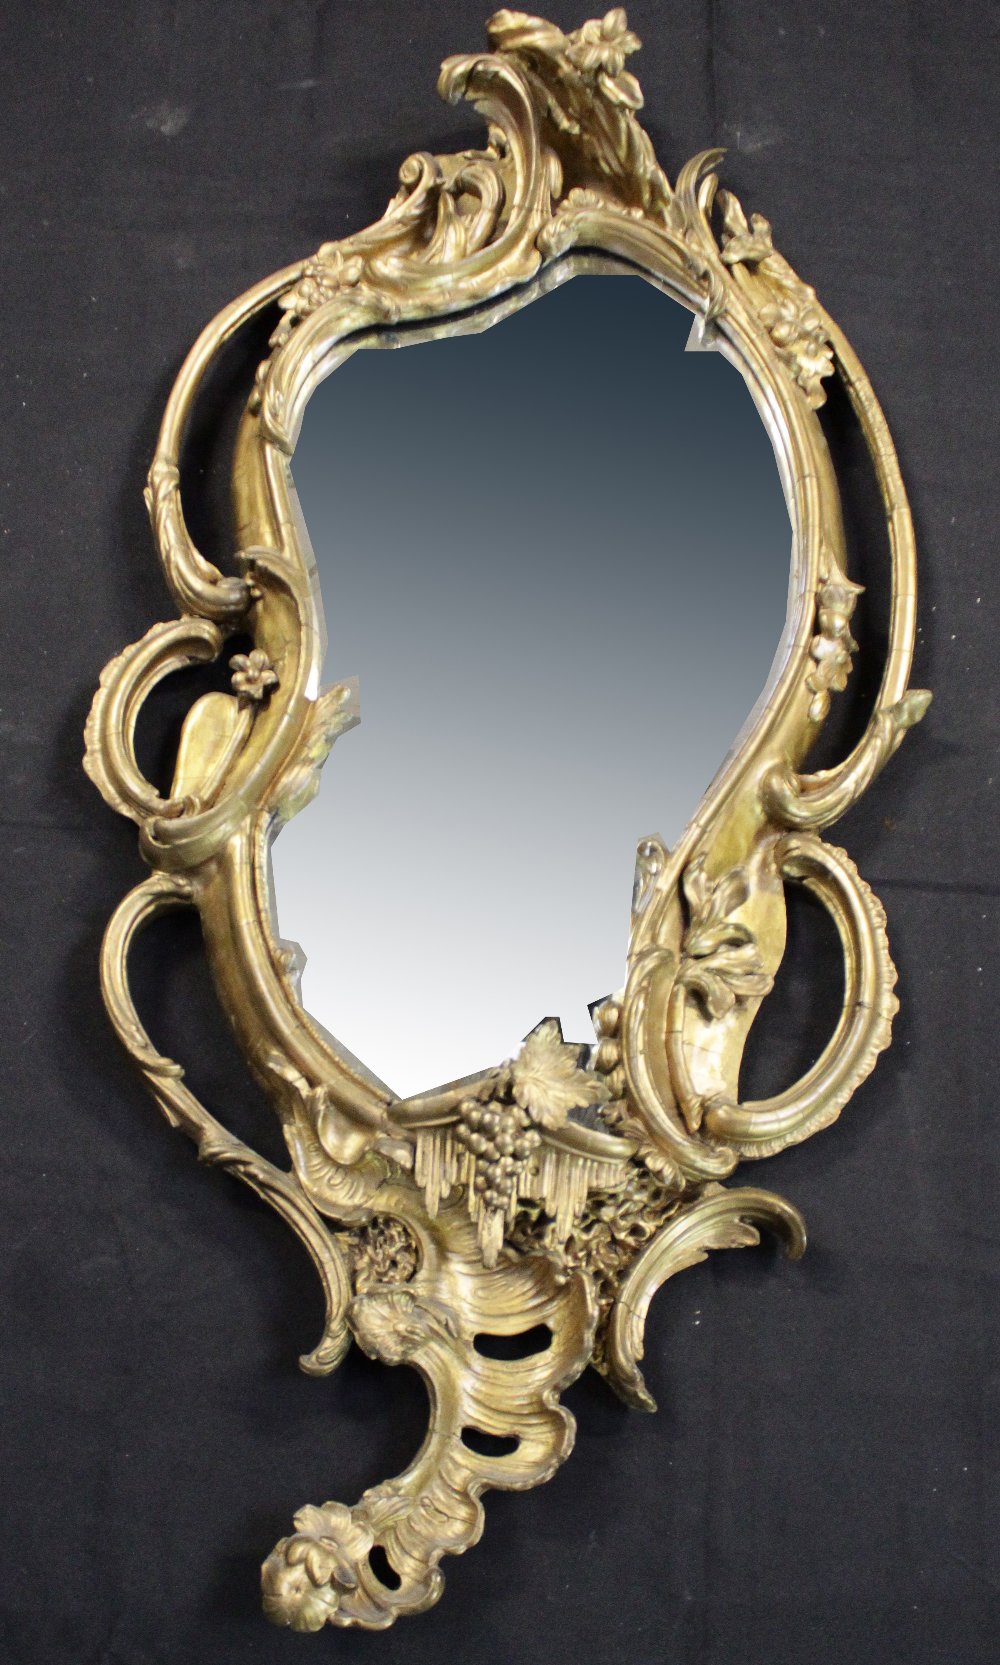 An early 20th century Rococo-style gilt wall mirror, height 145cm (af).